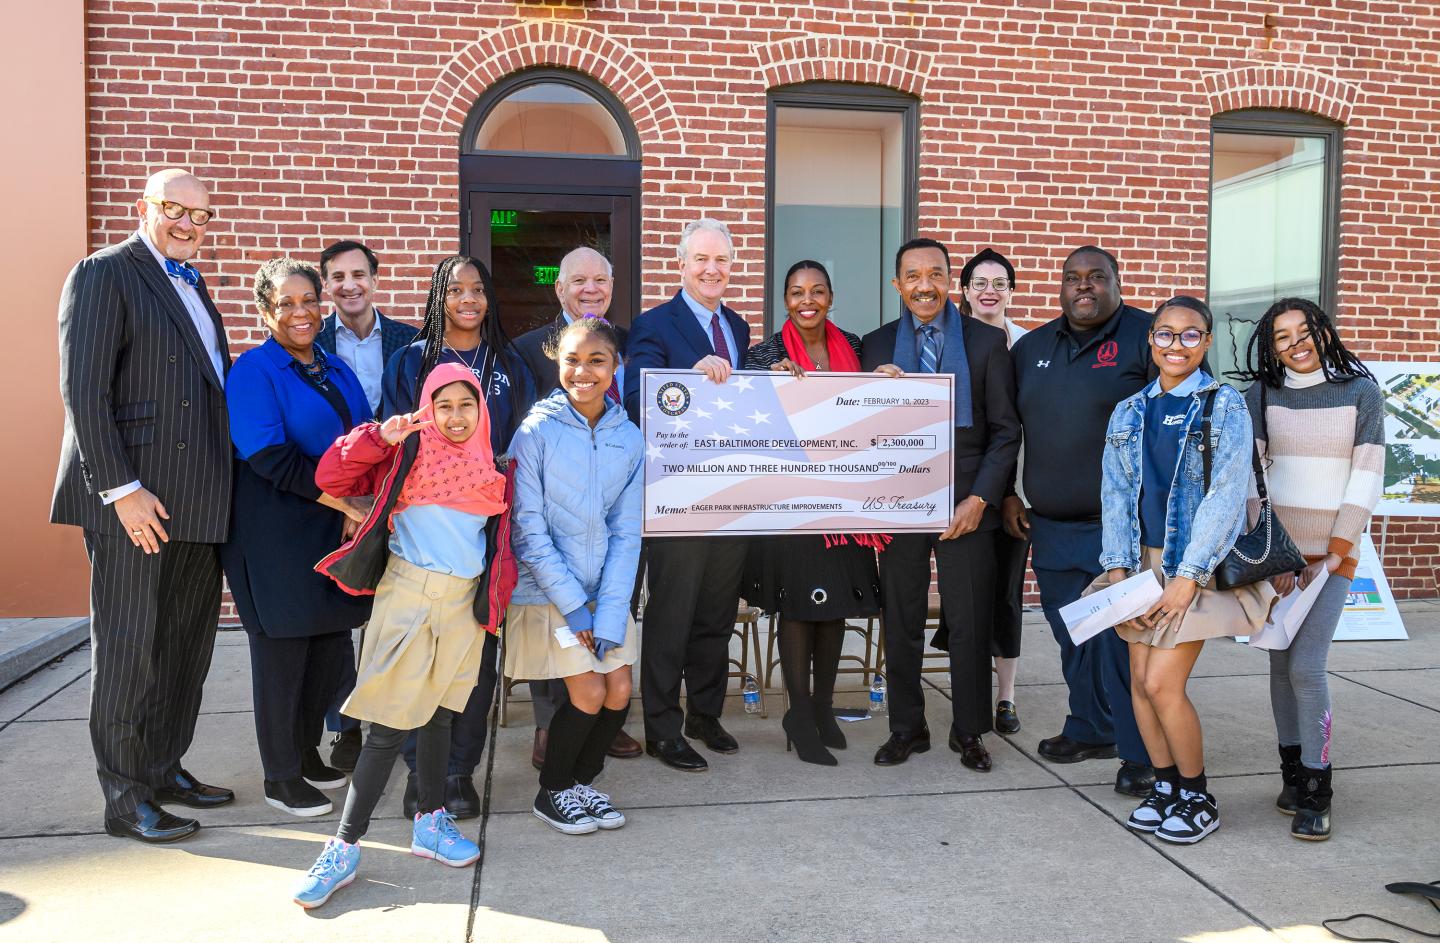 A group of 14 people - elected officials, students, and others - pose with a novelty check for $2.3 million